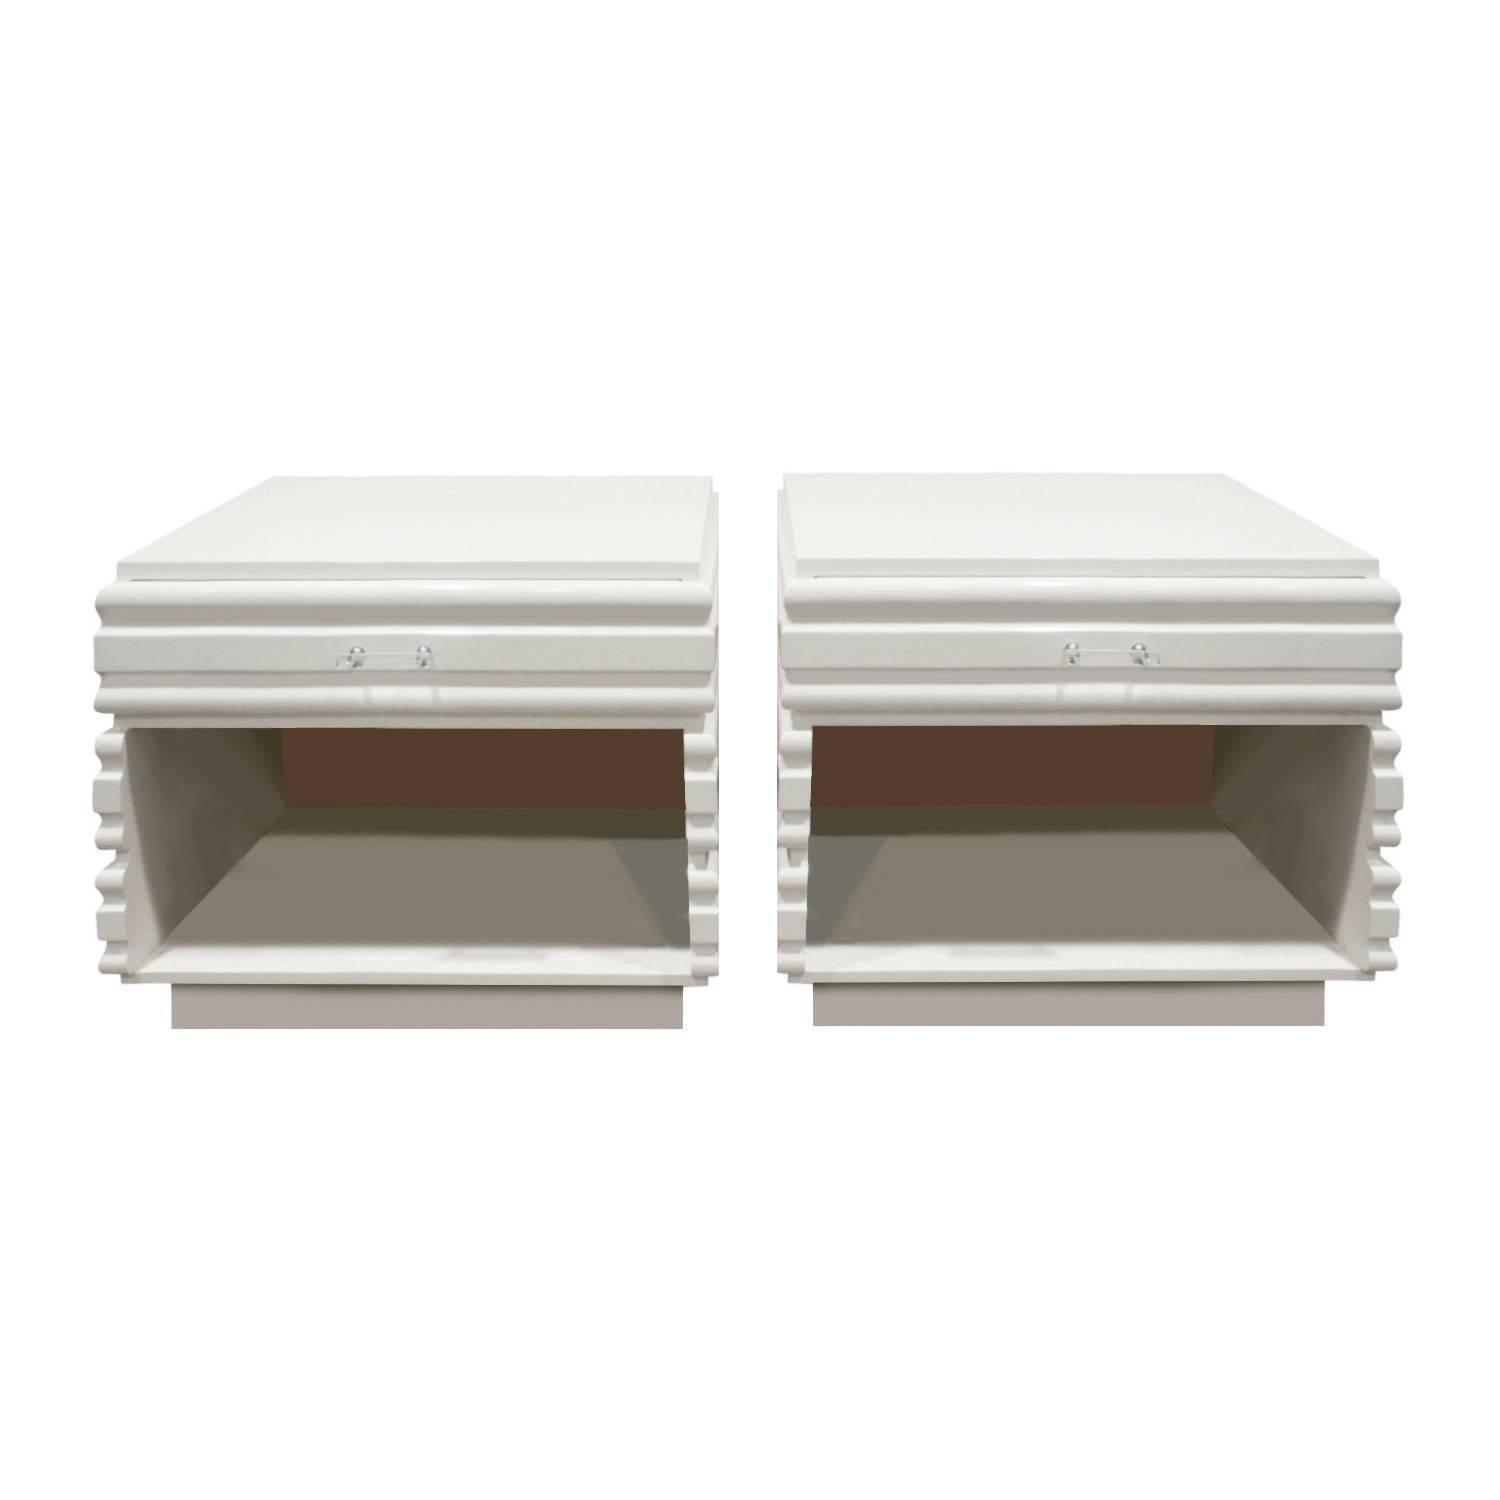 Pair of Sculptural Lacquered Bedside Tables with Lucite Pulls, 1970s